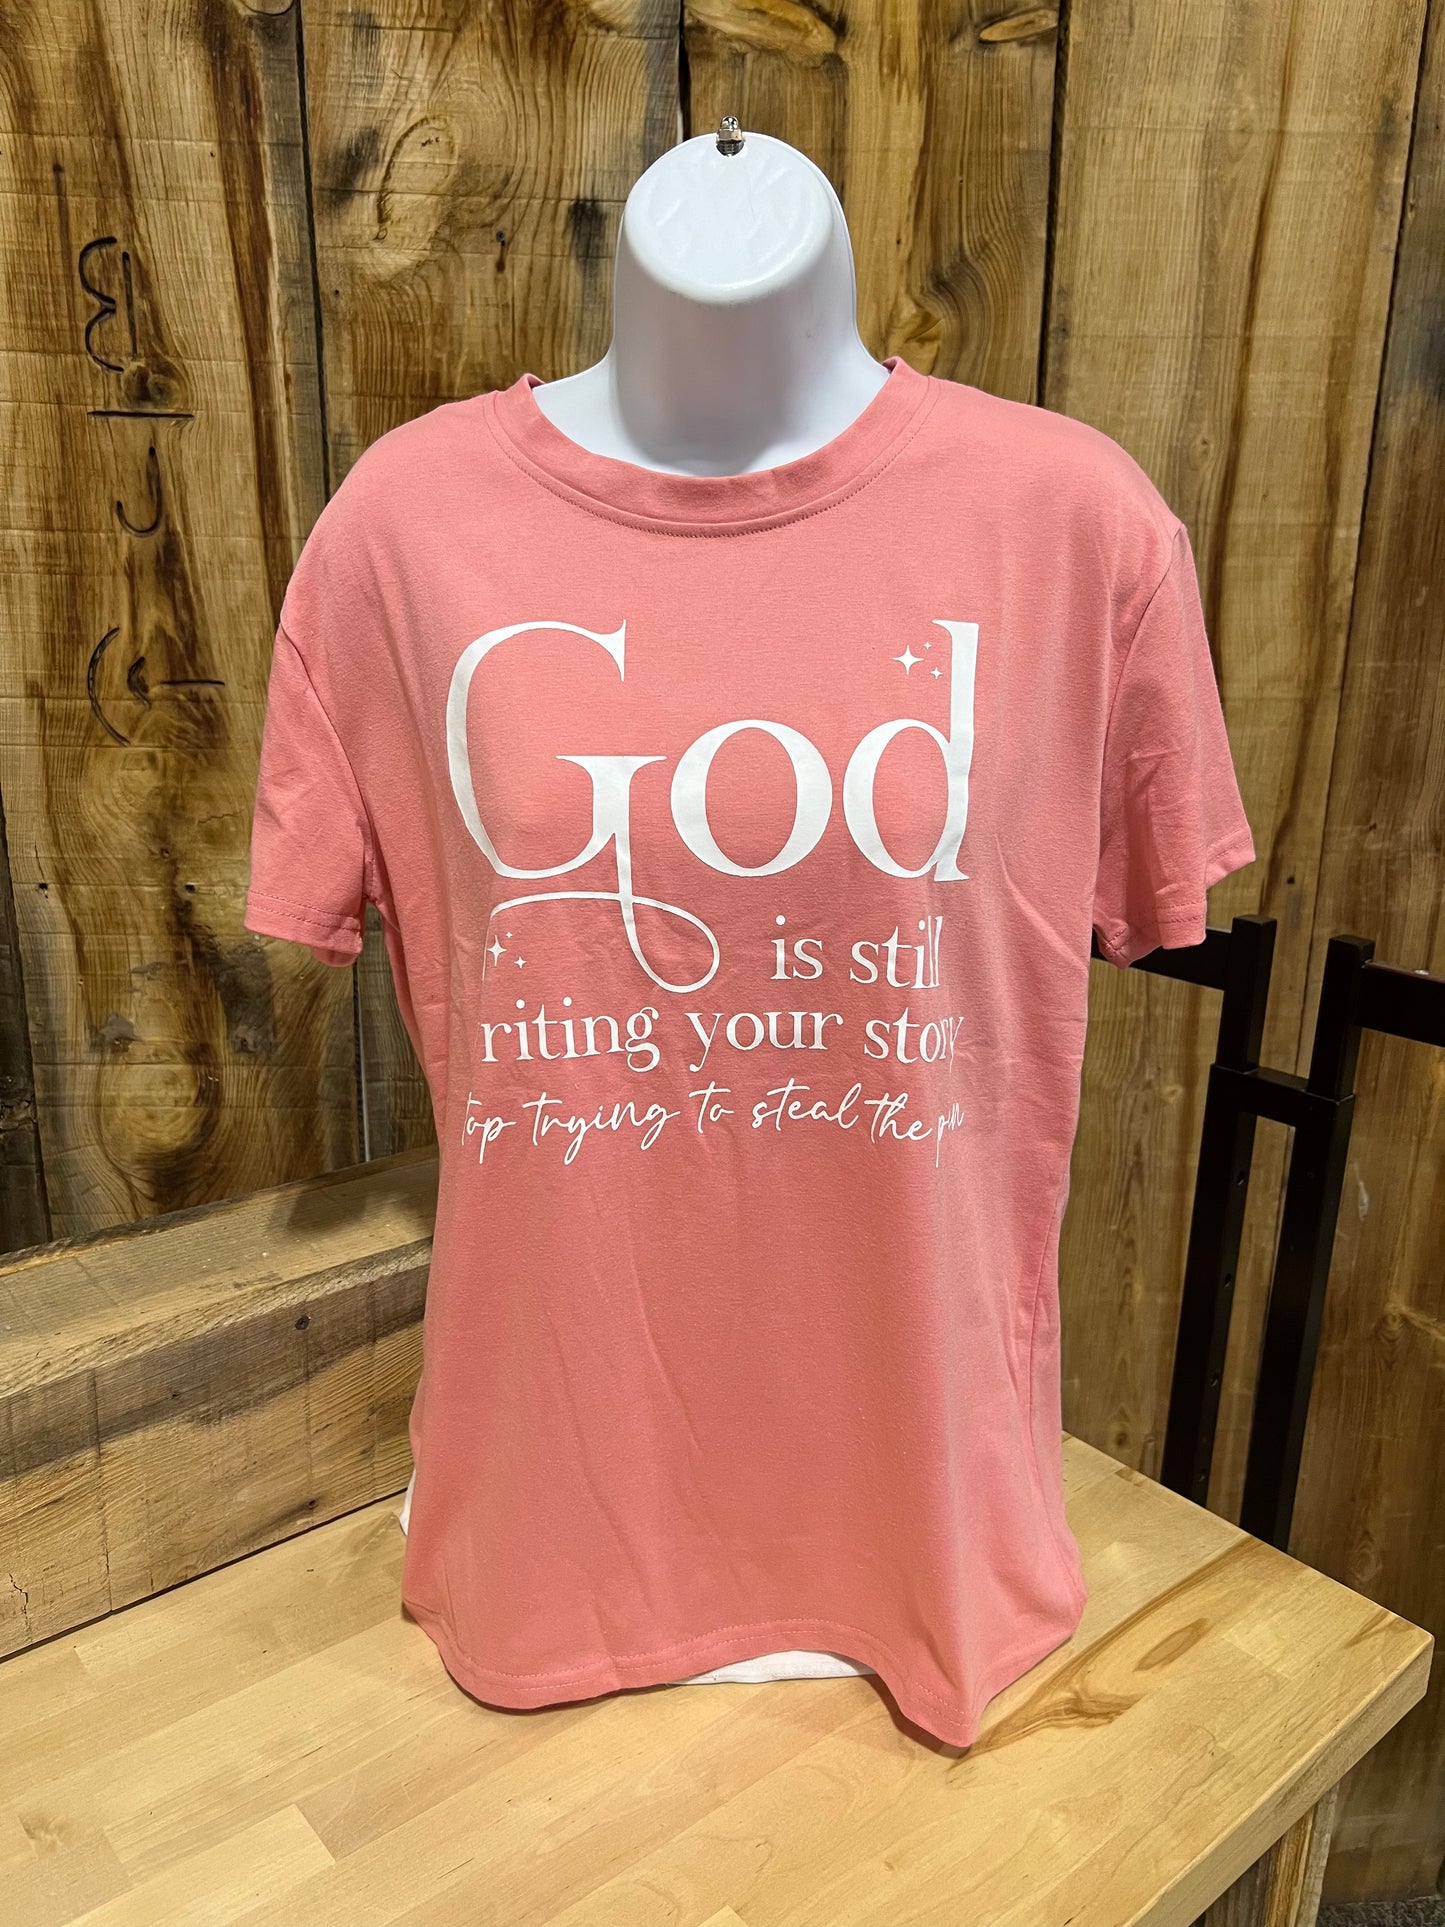 God Is Still Writing Your Story Tee